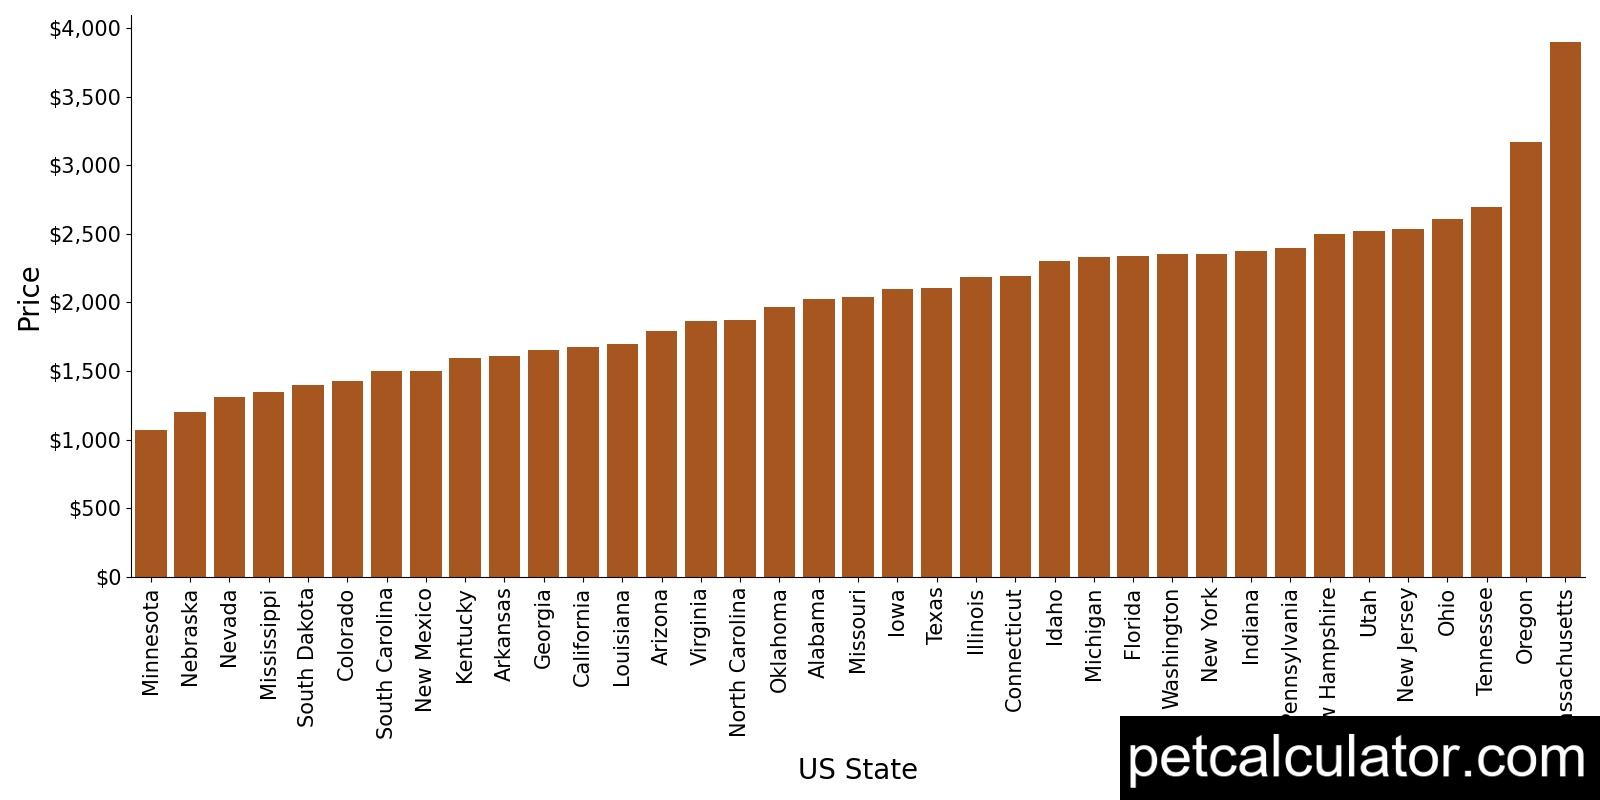 Price of Maltipoo by US State 